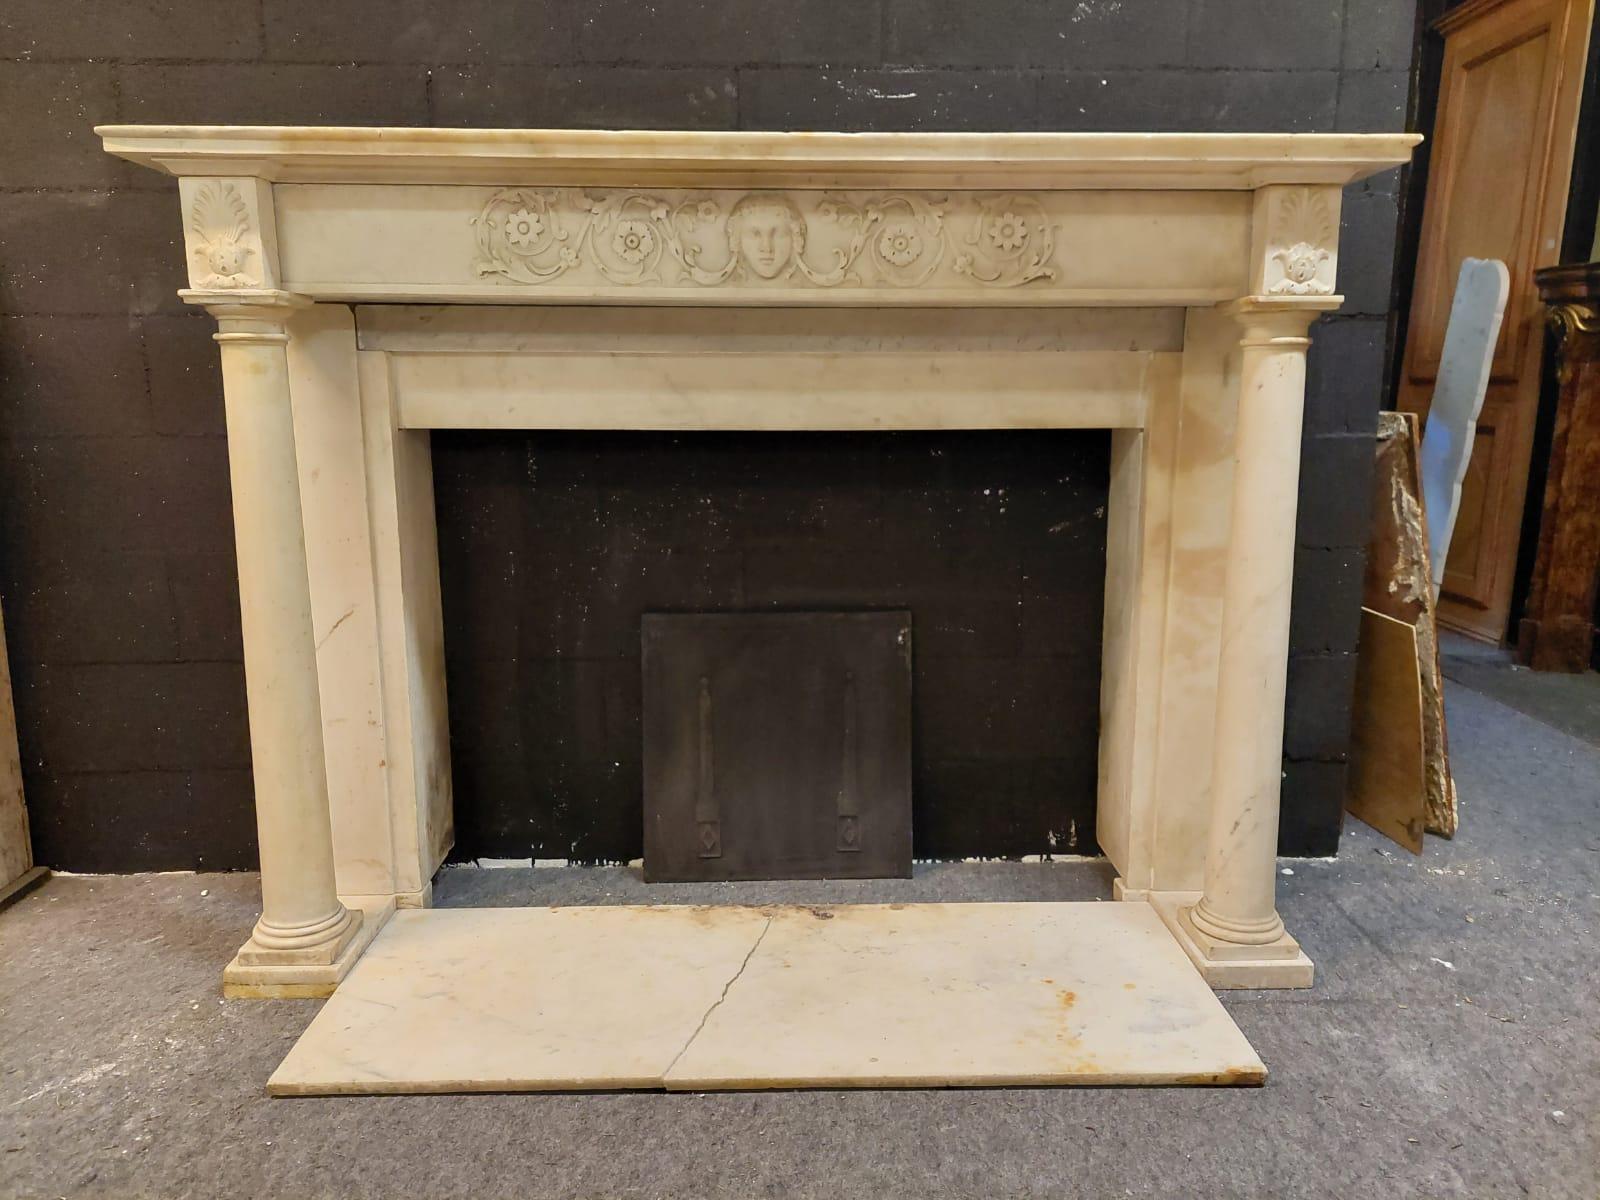 Antique mantel fireplace, hand-carved in white Carrara marble, with columns and pediment with Venus, complete with original threshold to be repaired, from Milan, built in the first quarter of the 19th century by an Italian craftsman. Elegant in